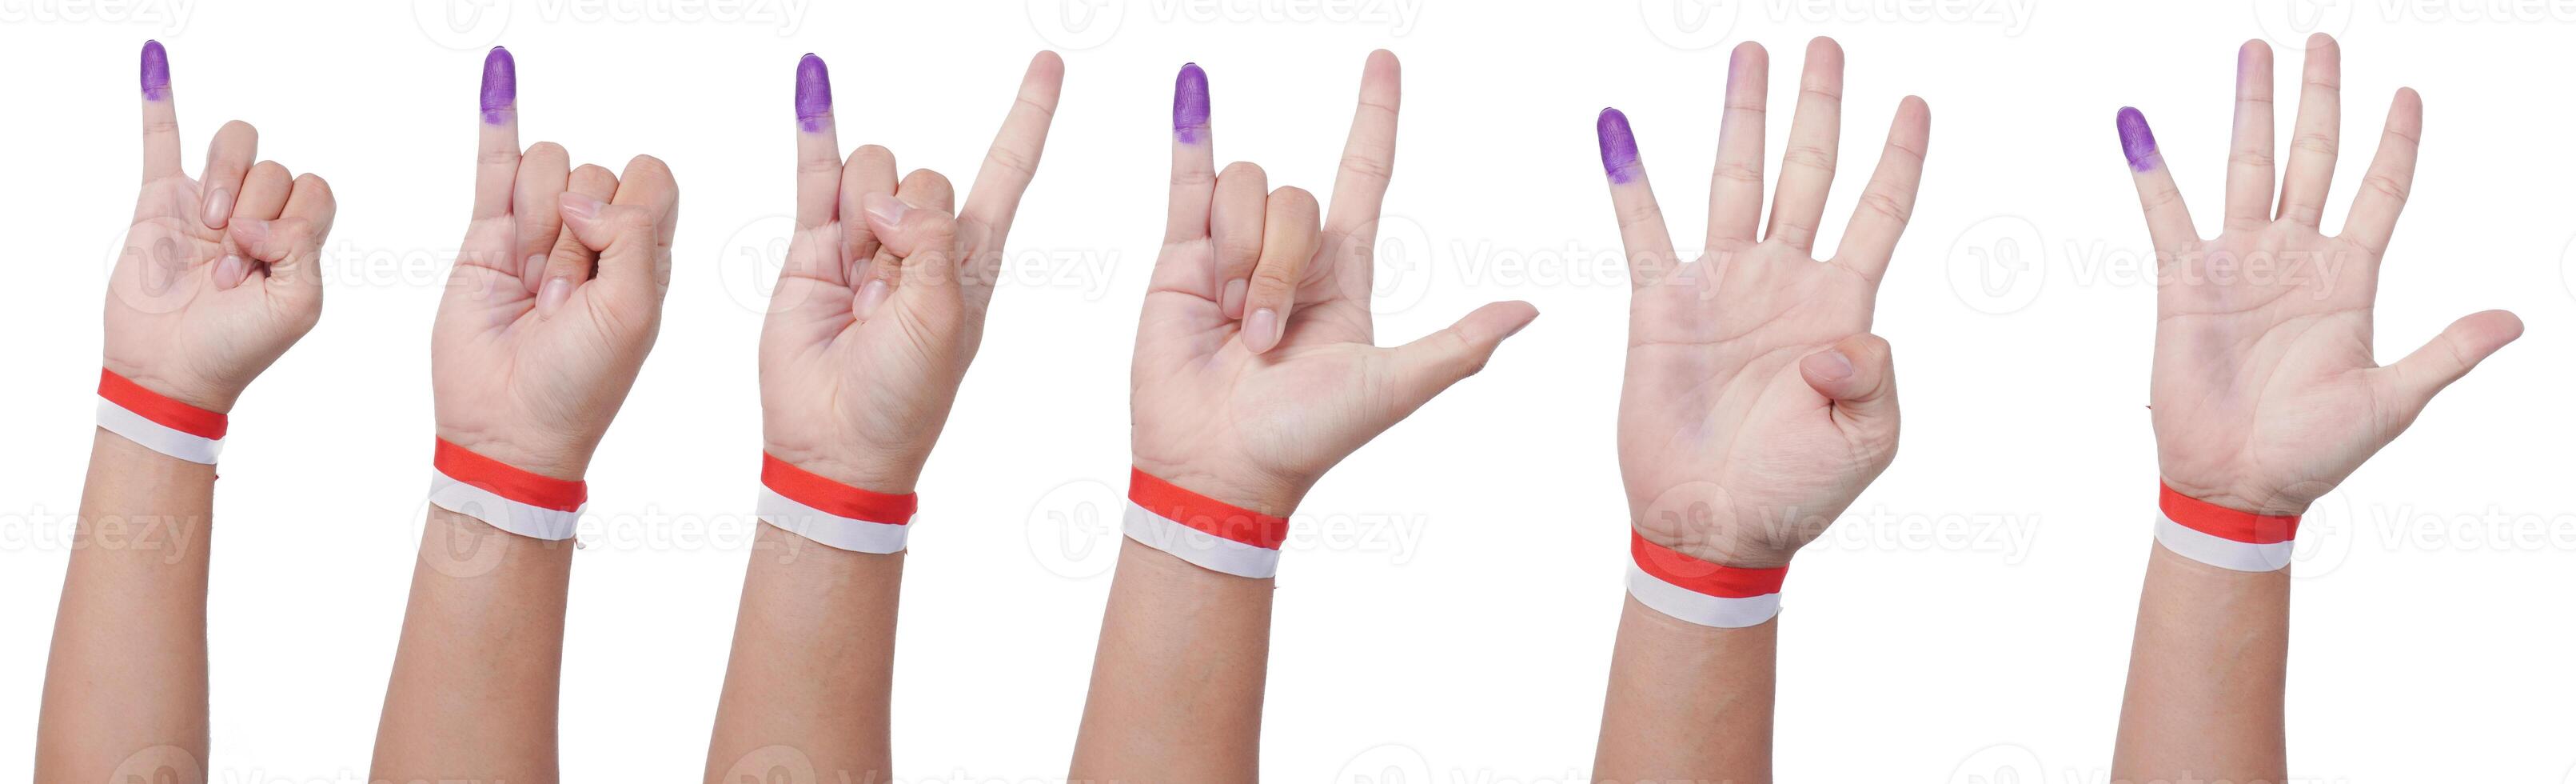 Group of hand wearing flag ribbon on wrist showing little finger dipped in purple ink after voting for Indonesia Election or Pemilu while holding mini flag, isolated over white background photo